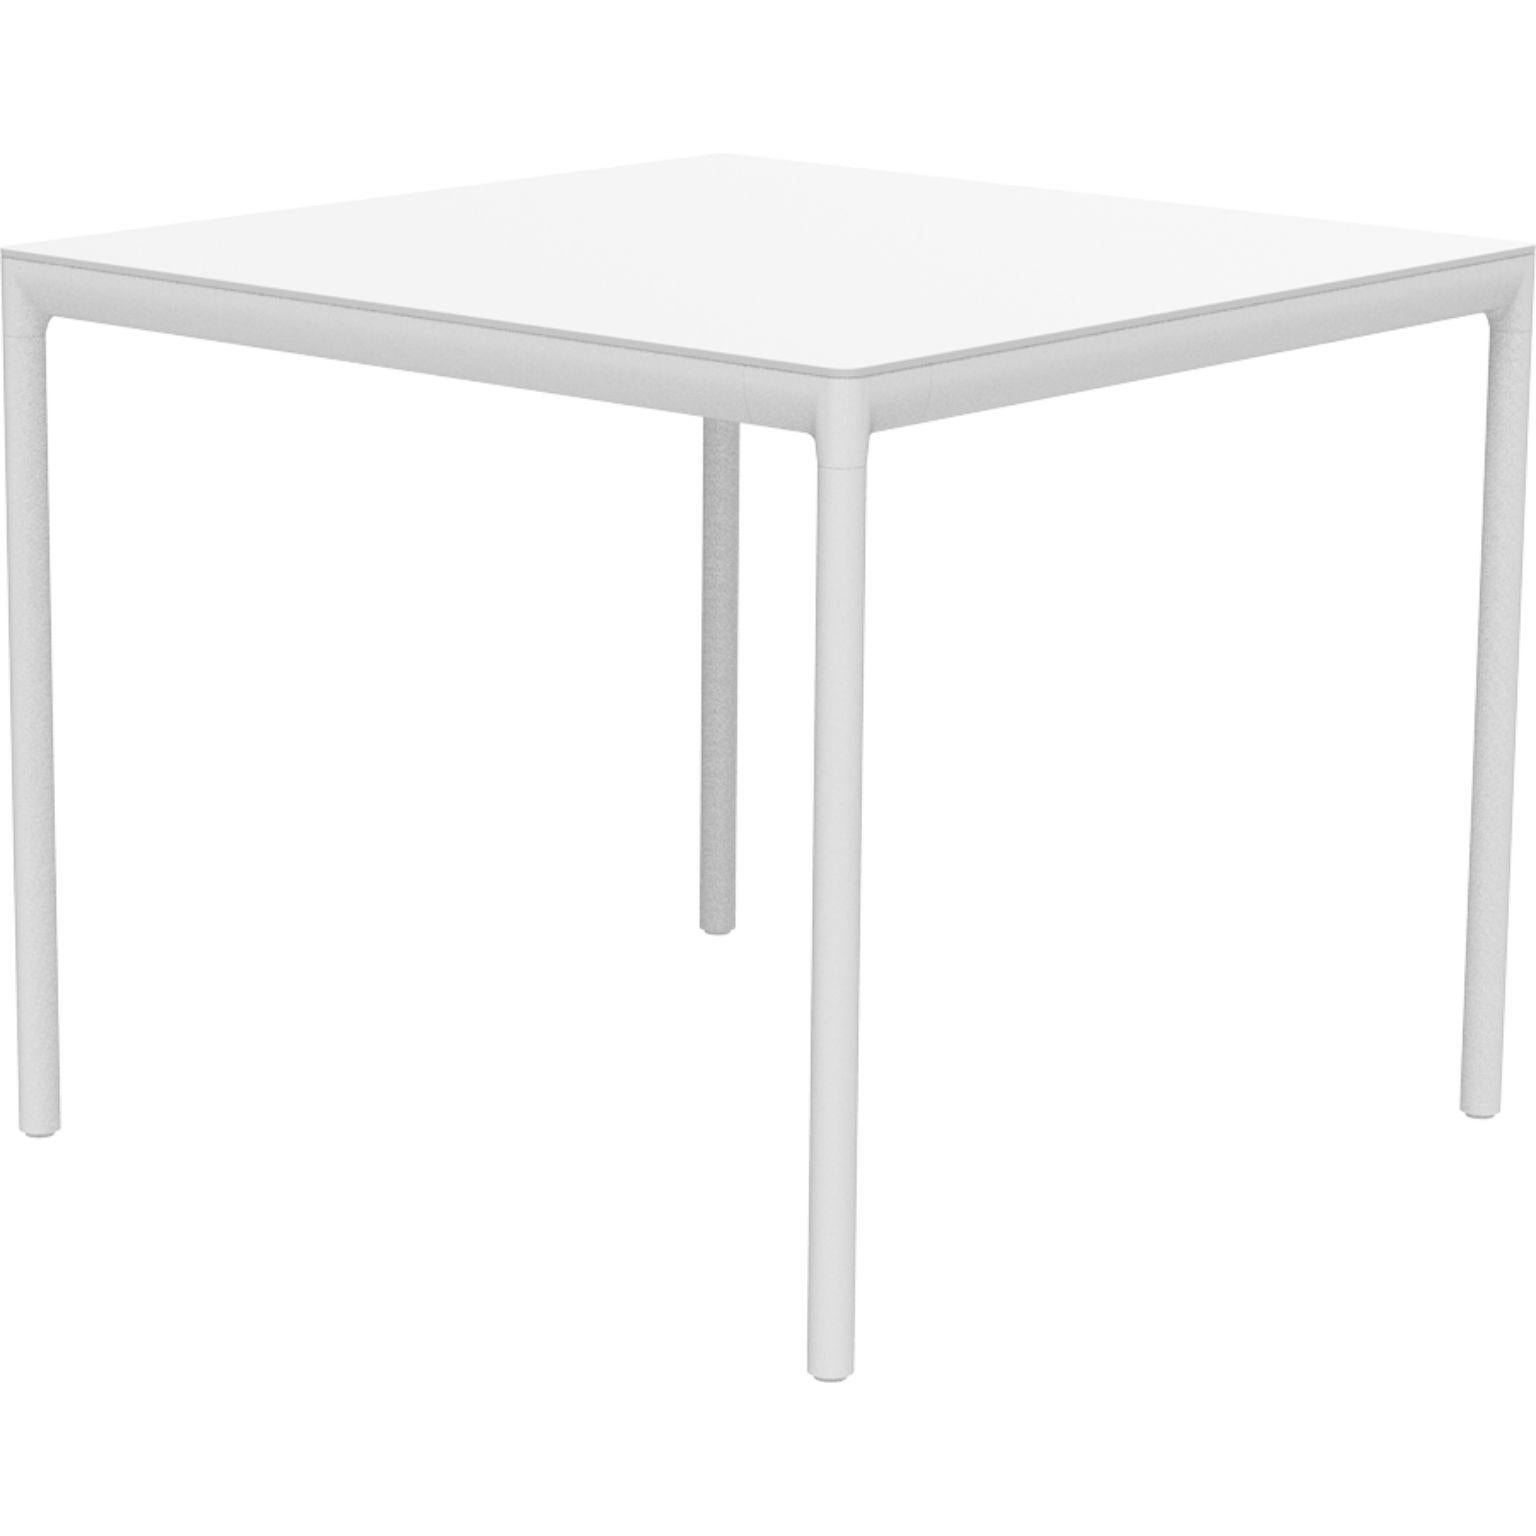 Ribbons white 90 table by MOWEE
Dimensions: D90 x W90 x H75 cm.
Material: Aluminum and HPL top.
Weight: 16 kg.
Also available in different colors and finishes. (HPL Black Edge or Neolith top).

An unmistakable collection for its beauty and